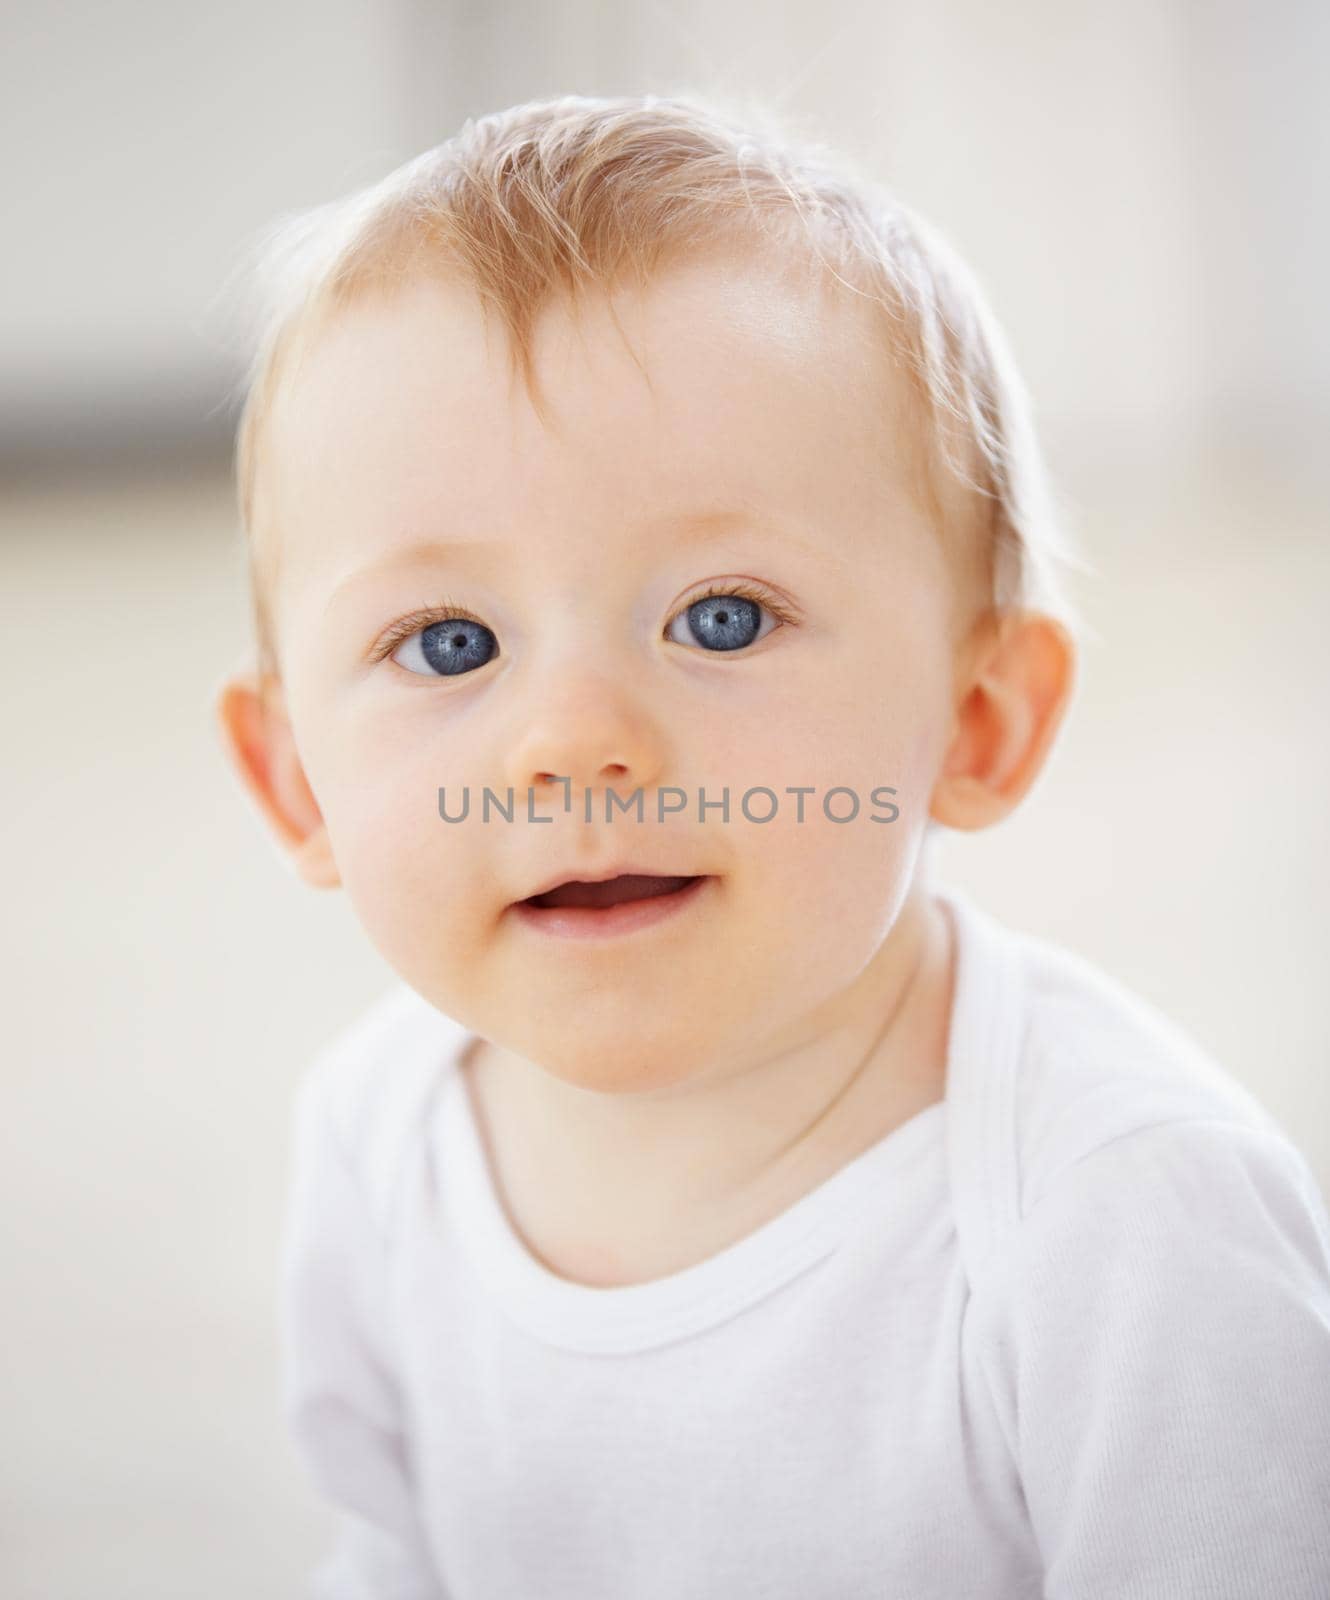 Portrait of an adorable baby boy.